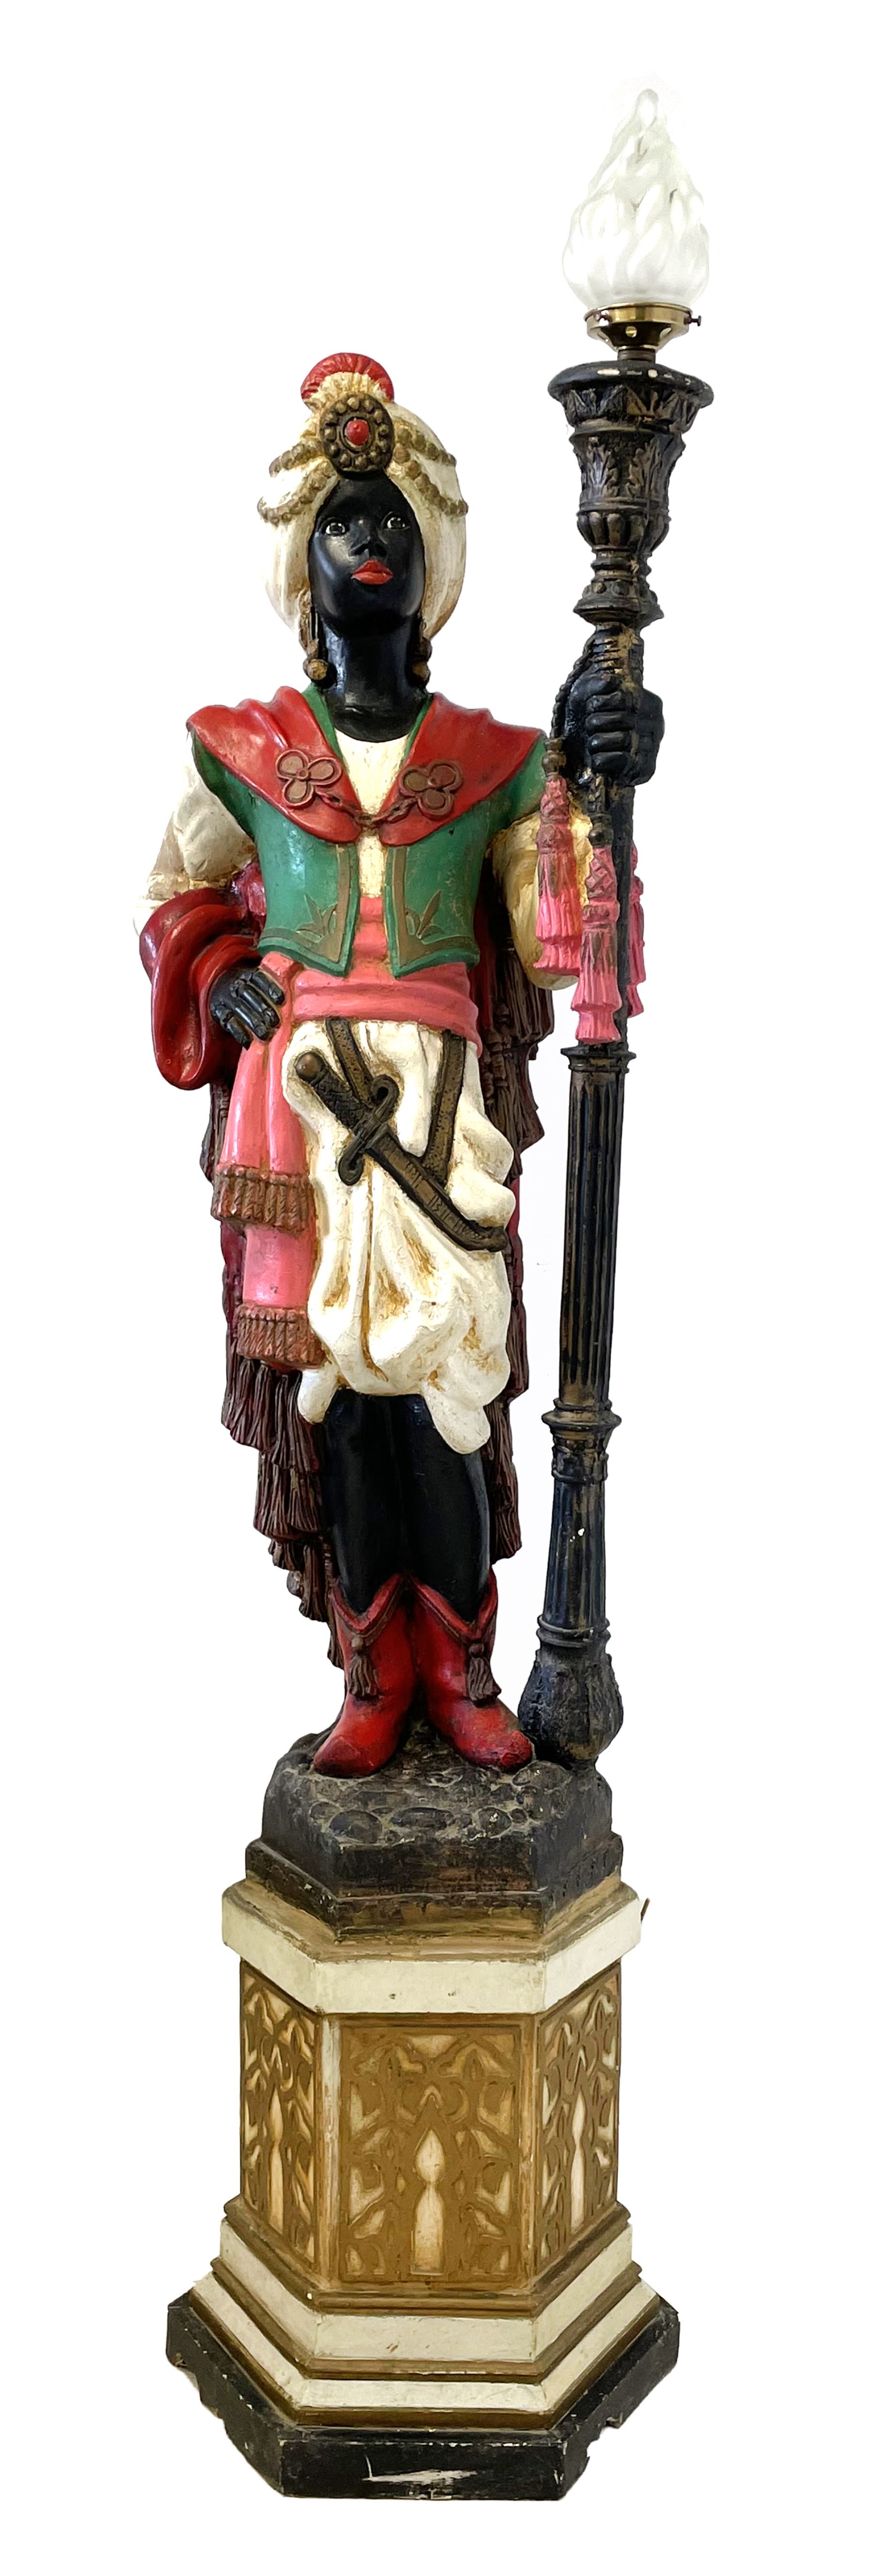 Standard lamp in the form of a Moorish courtier holding a light in the form of a torch staff